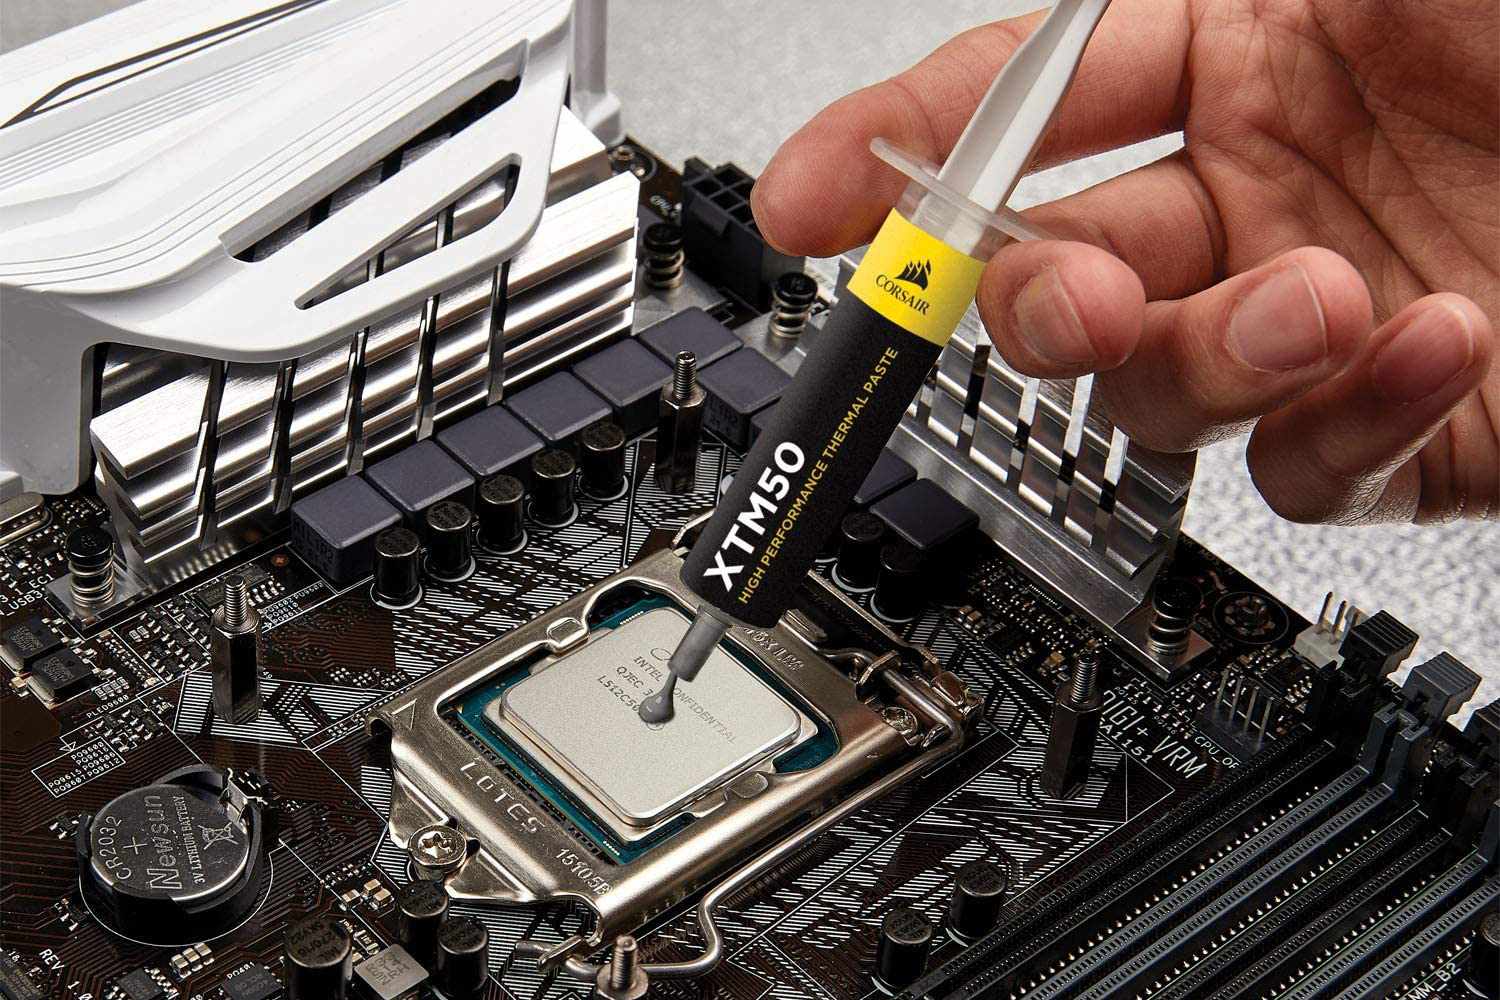  How to apply and clean off thermal paste